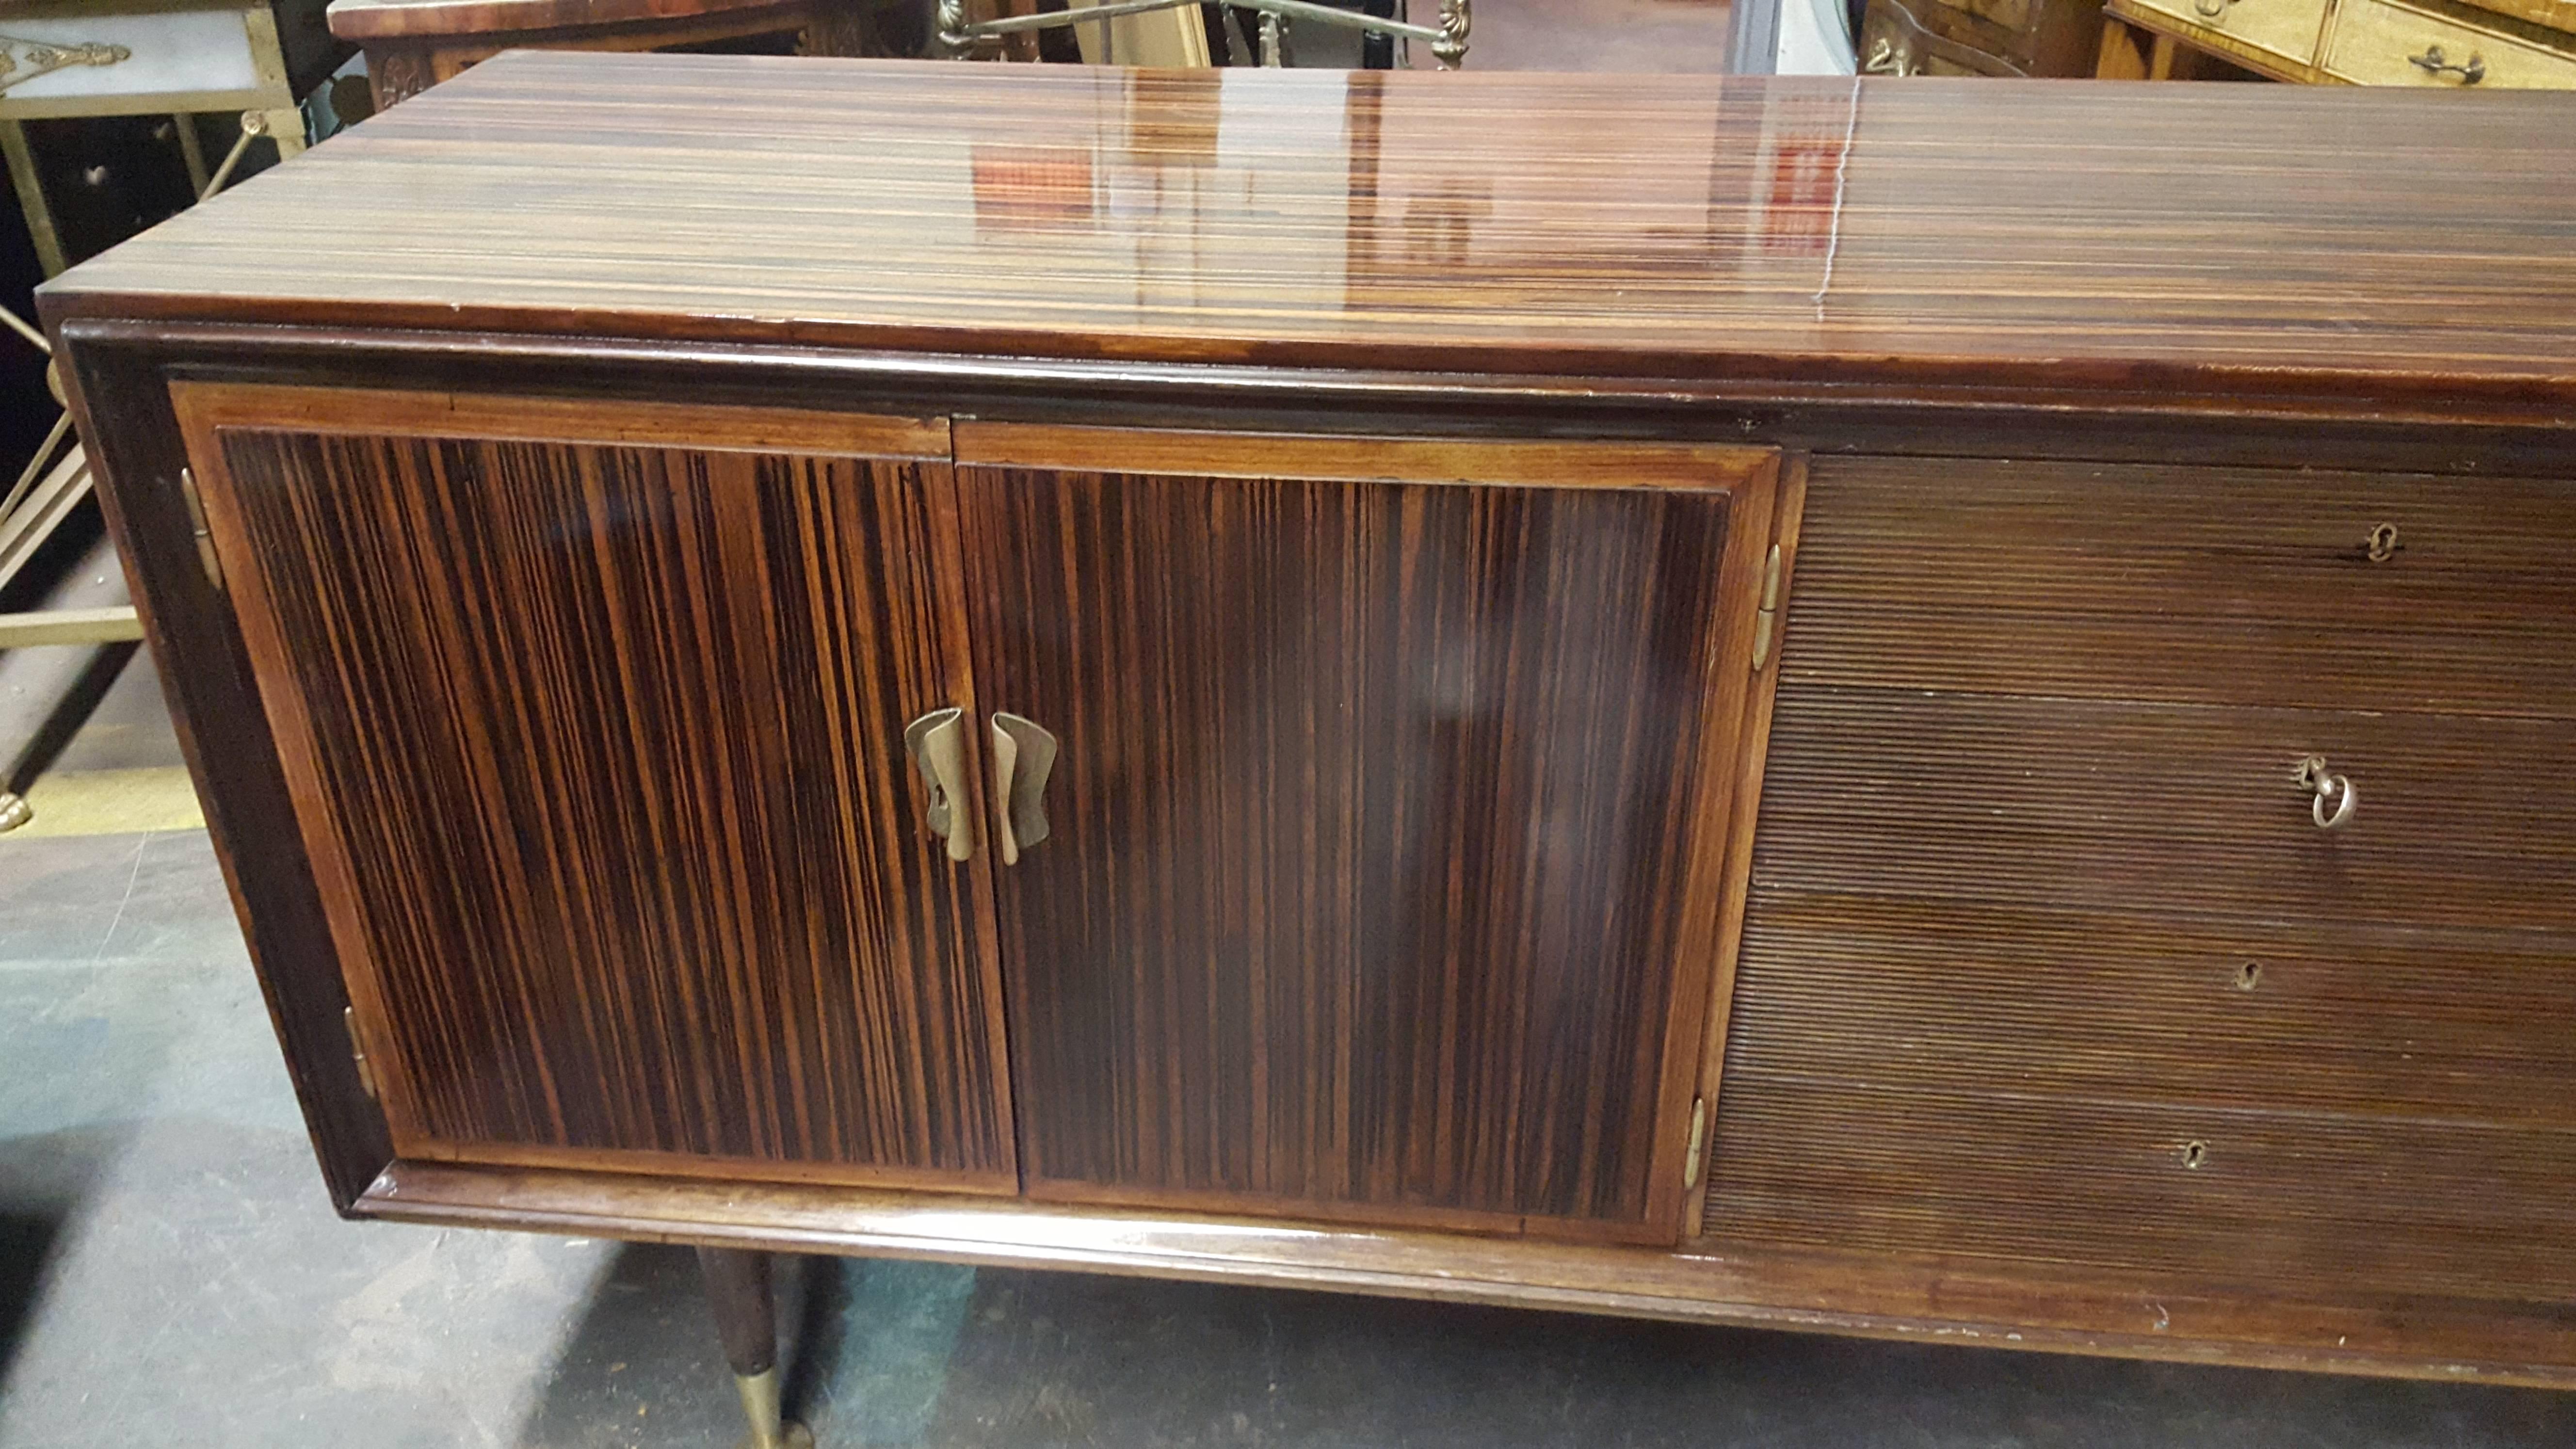 Faux Macassar ebony sideboard with reeded central drawers, bird's eye maple interior fitted with shelves.